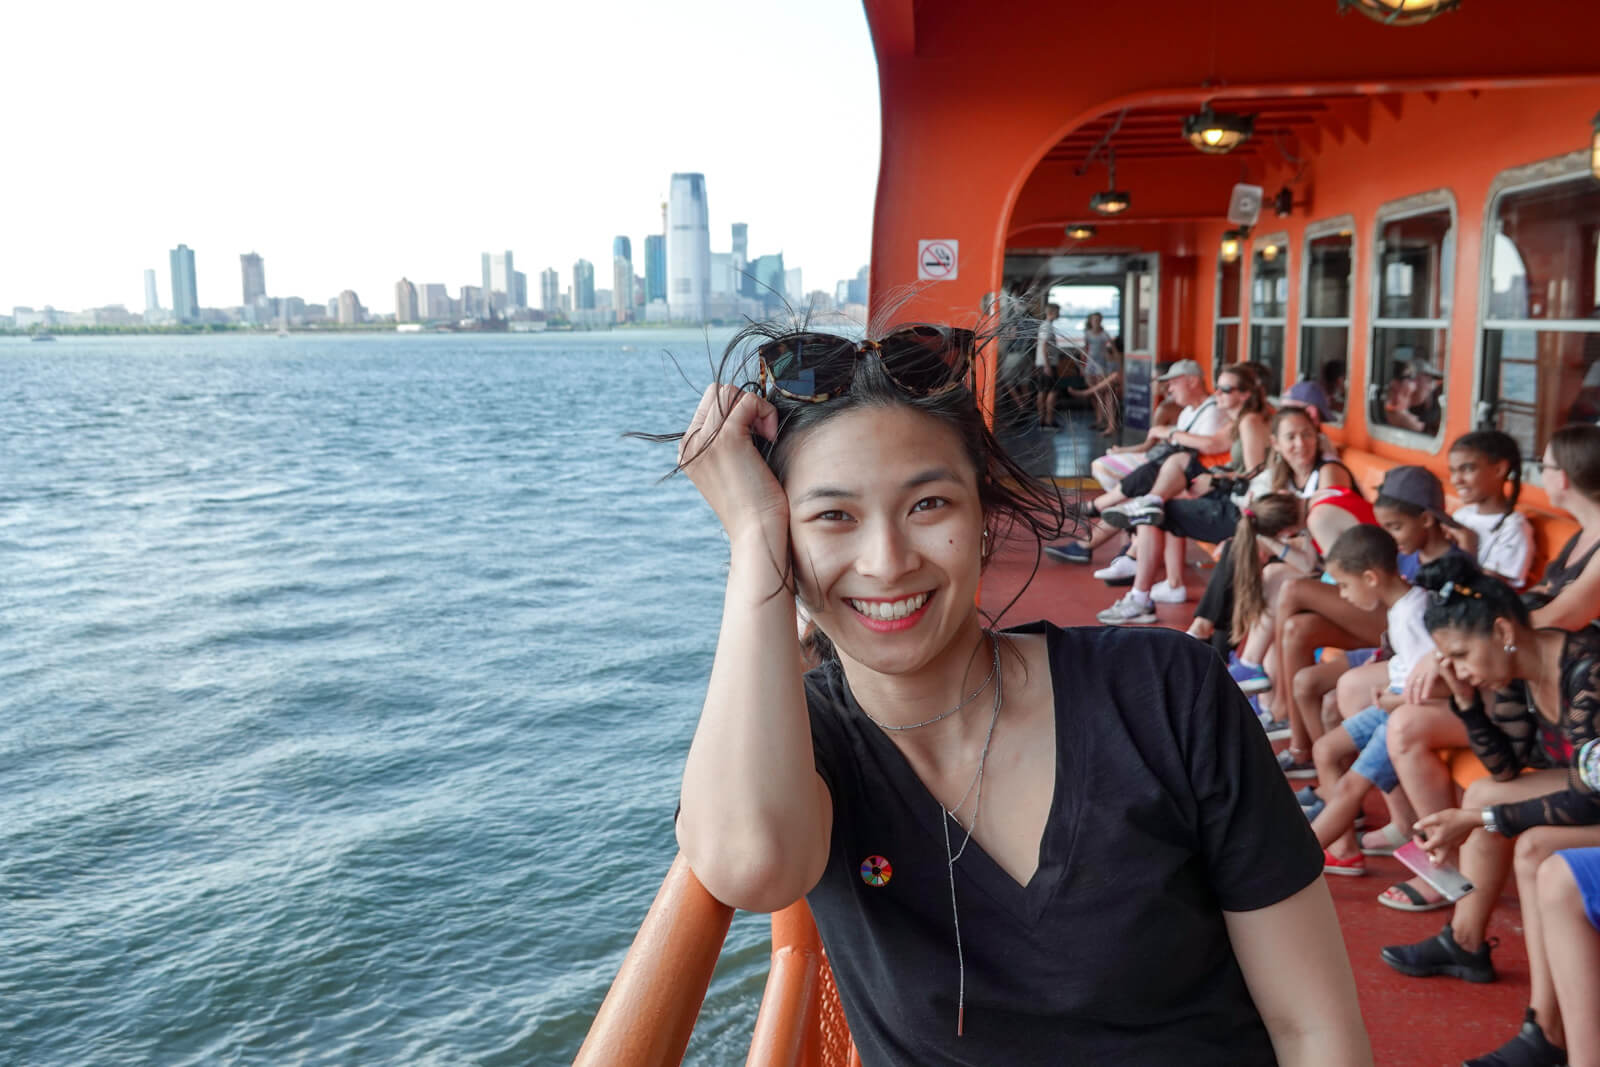 A photo of a woman on a ferry, her elbow leaning on a handrail. In the background is a New York City skyline